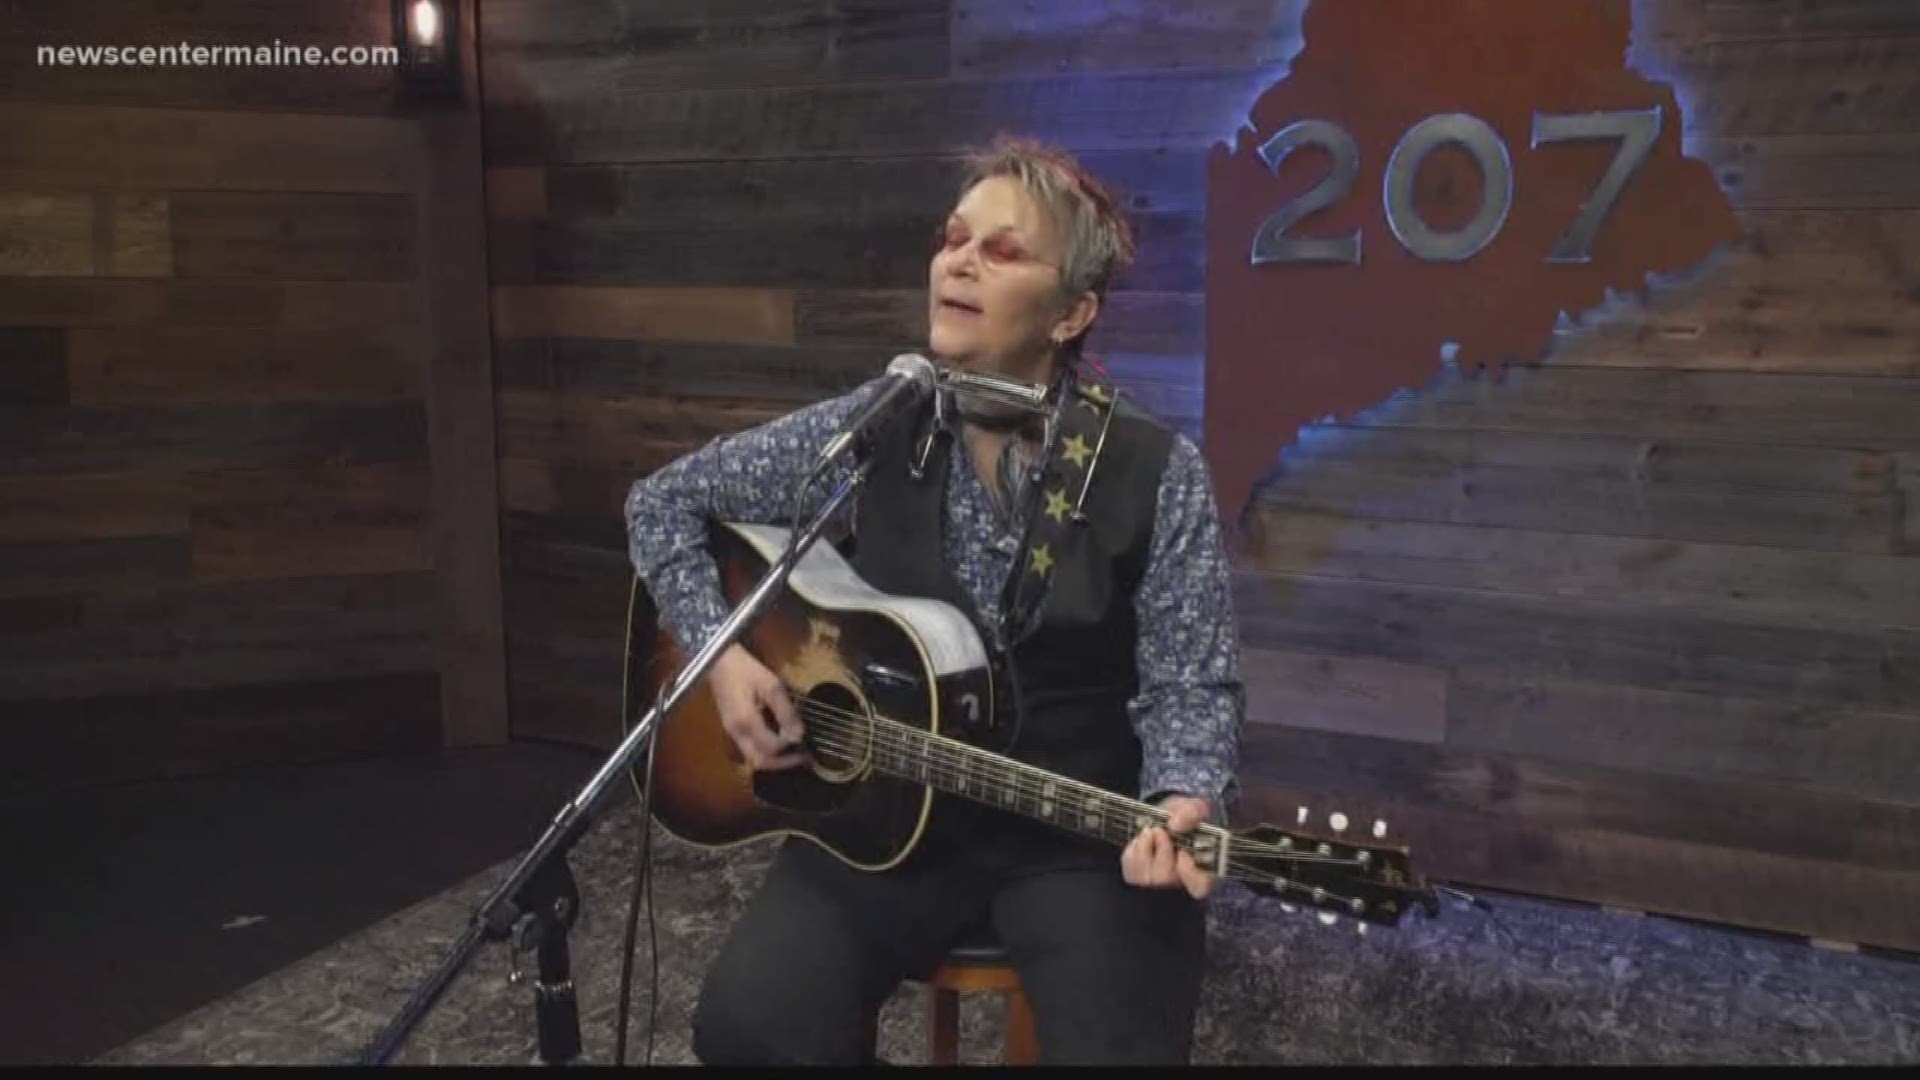 Mary Gauthier writes songs with veterans